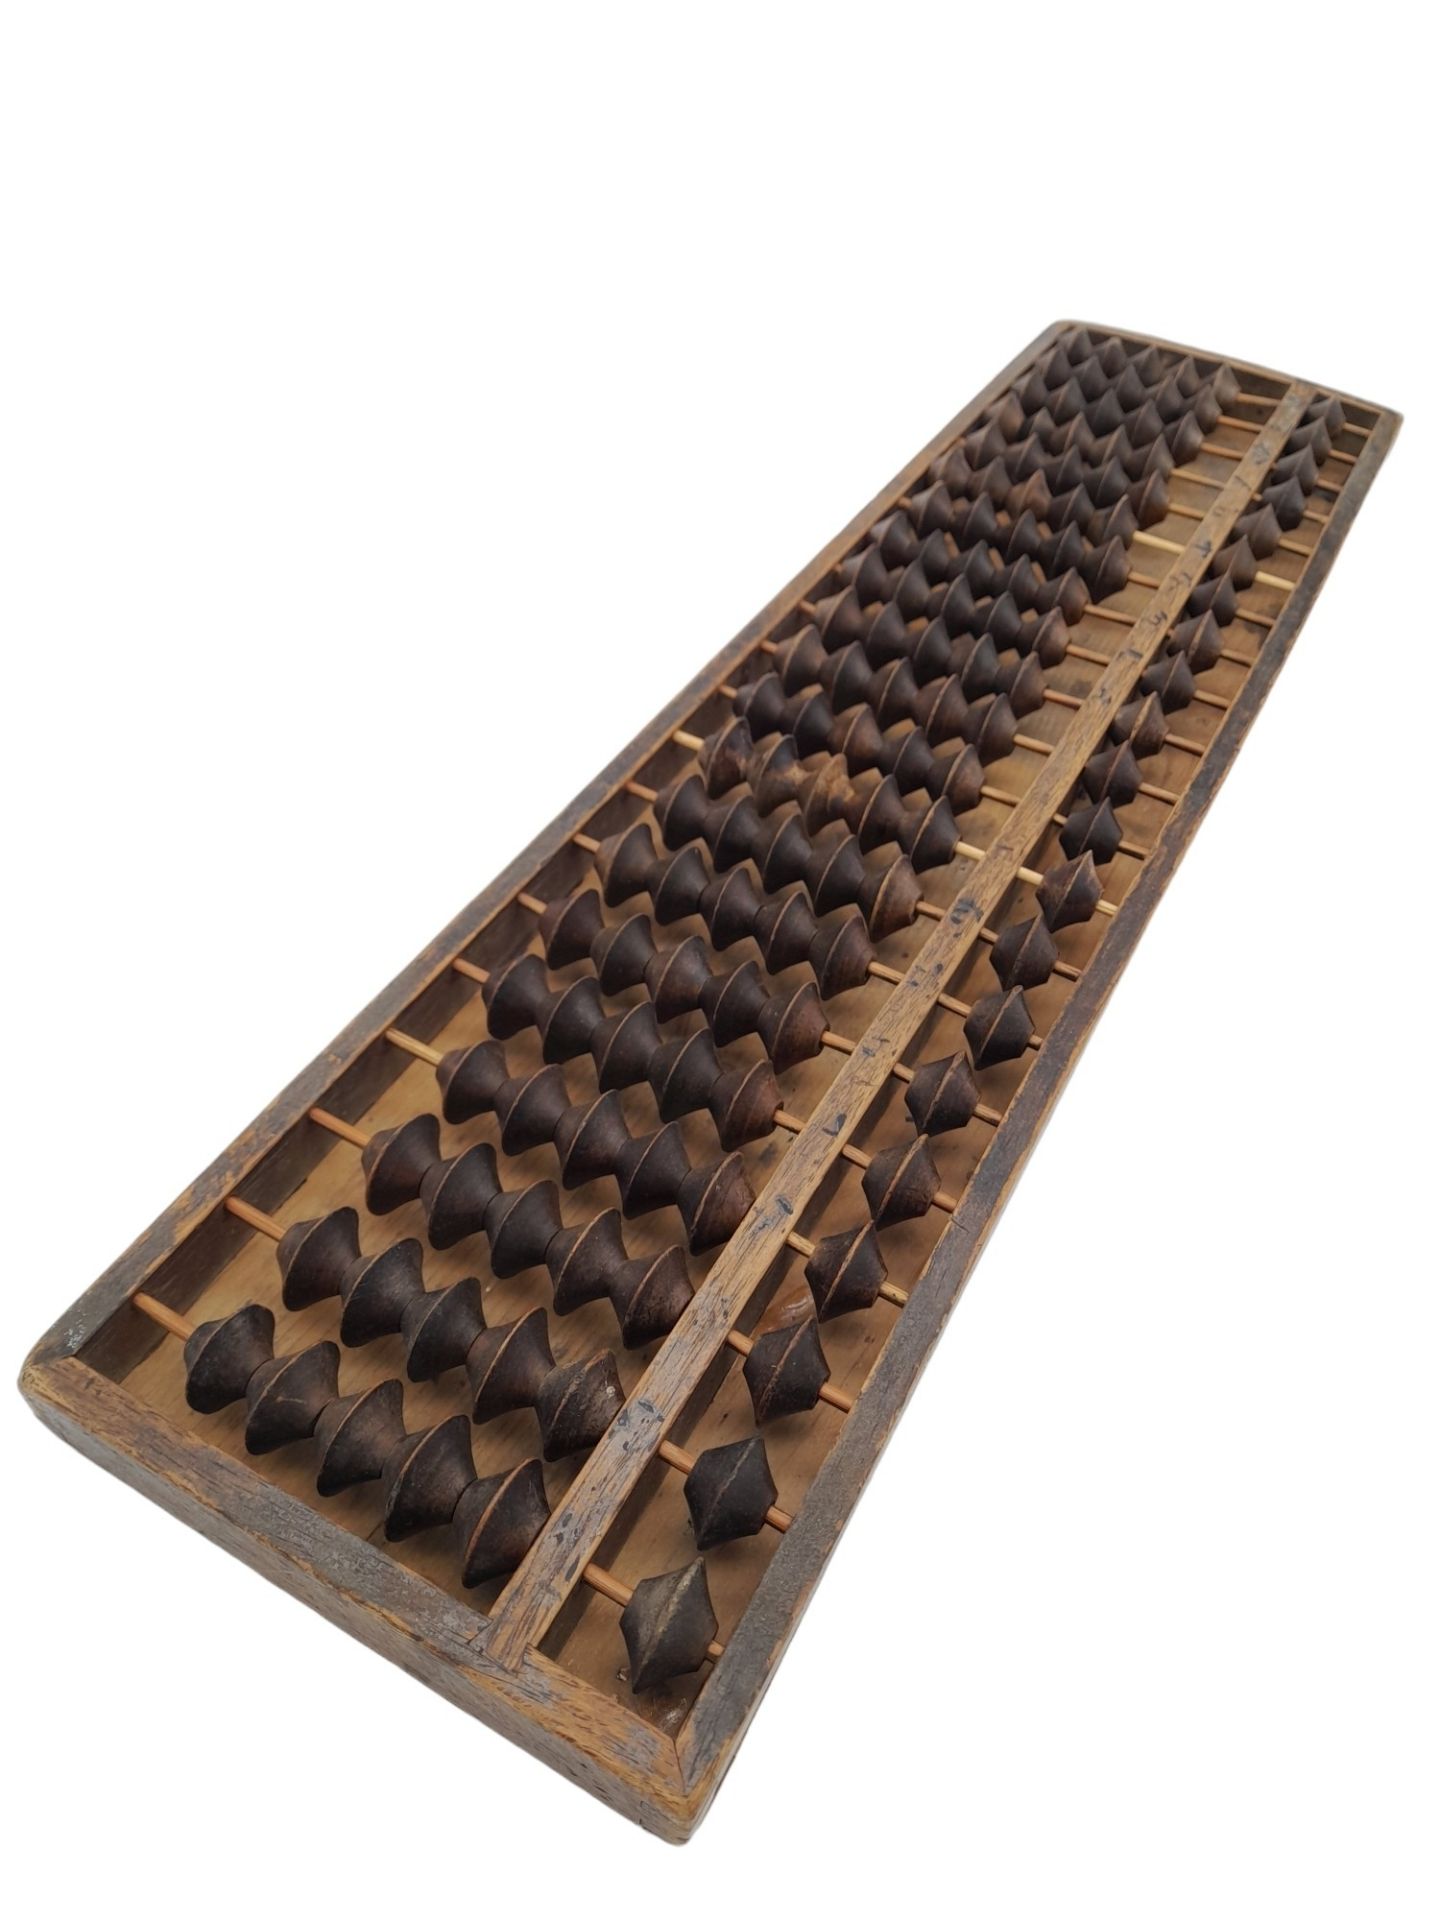 An Antique Chinese Wooden Abacus. 46cm x 12cm.